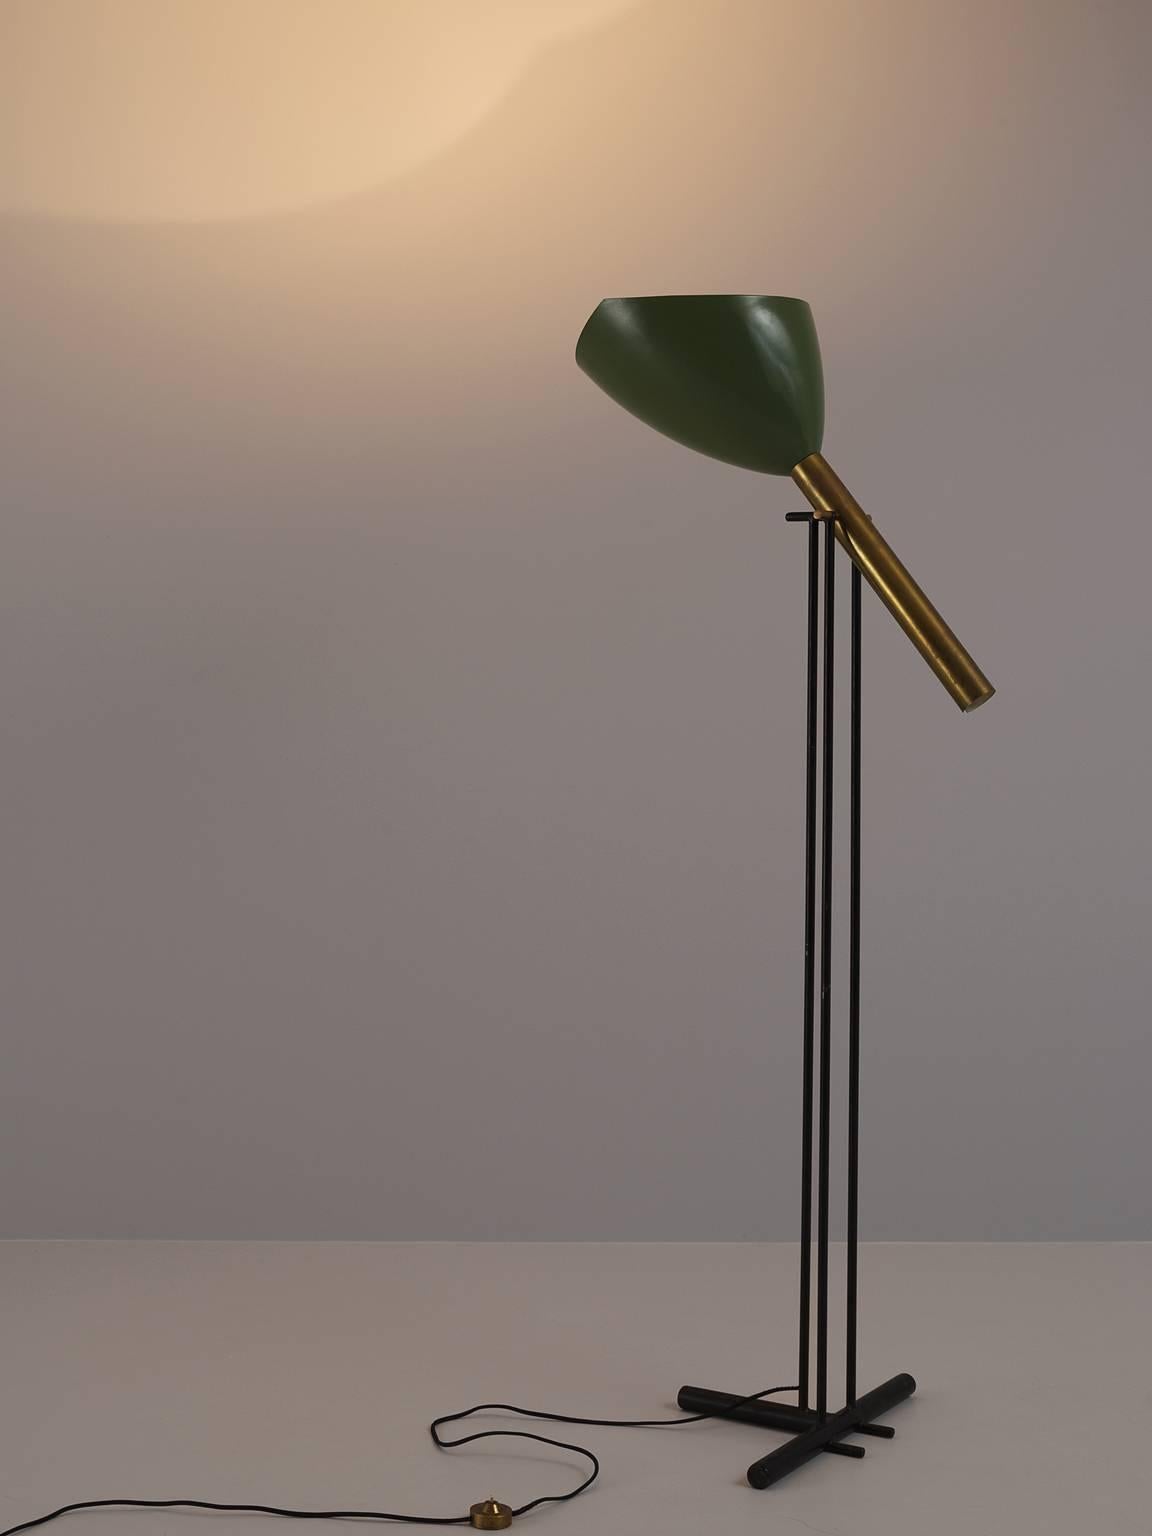 Ettore Sottsass for Arredoluce, metal and brass, Italy, 1957.

This early and stamped floor lamp is designed by Ettore Sottsass in black lacquered metal, brass and green lacquered metal and is executed by Arredoluce. The lamp is stamped with